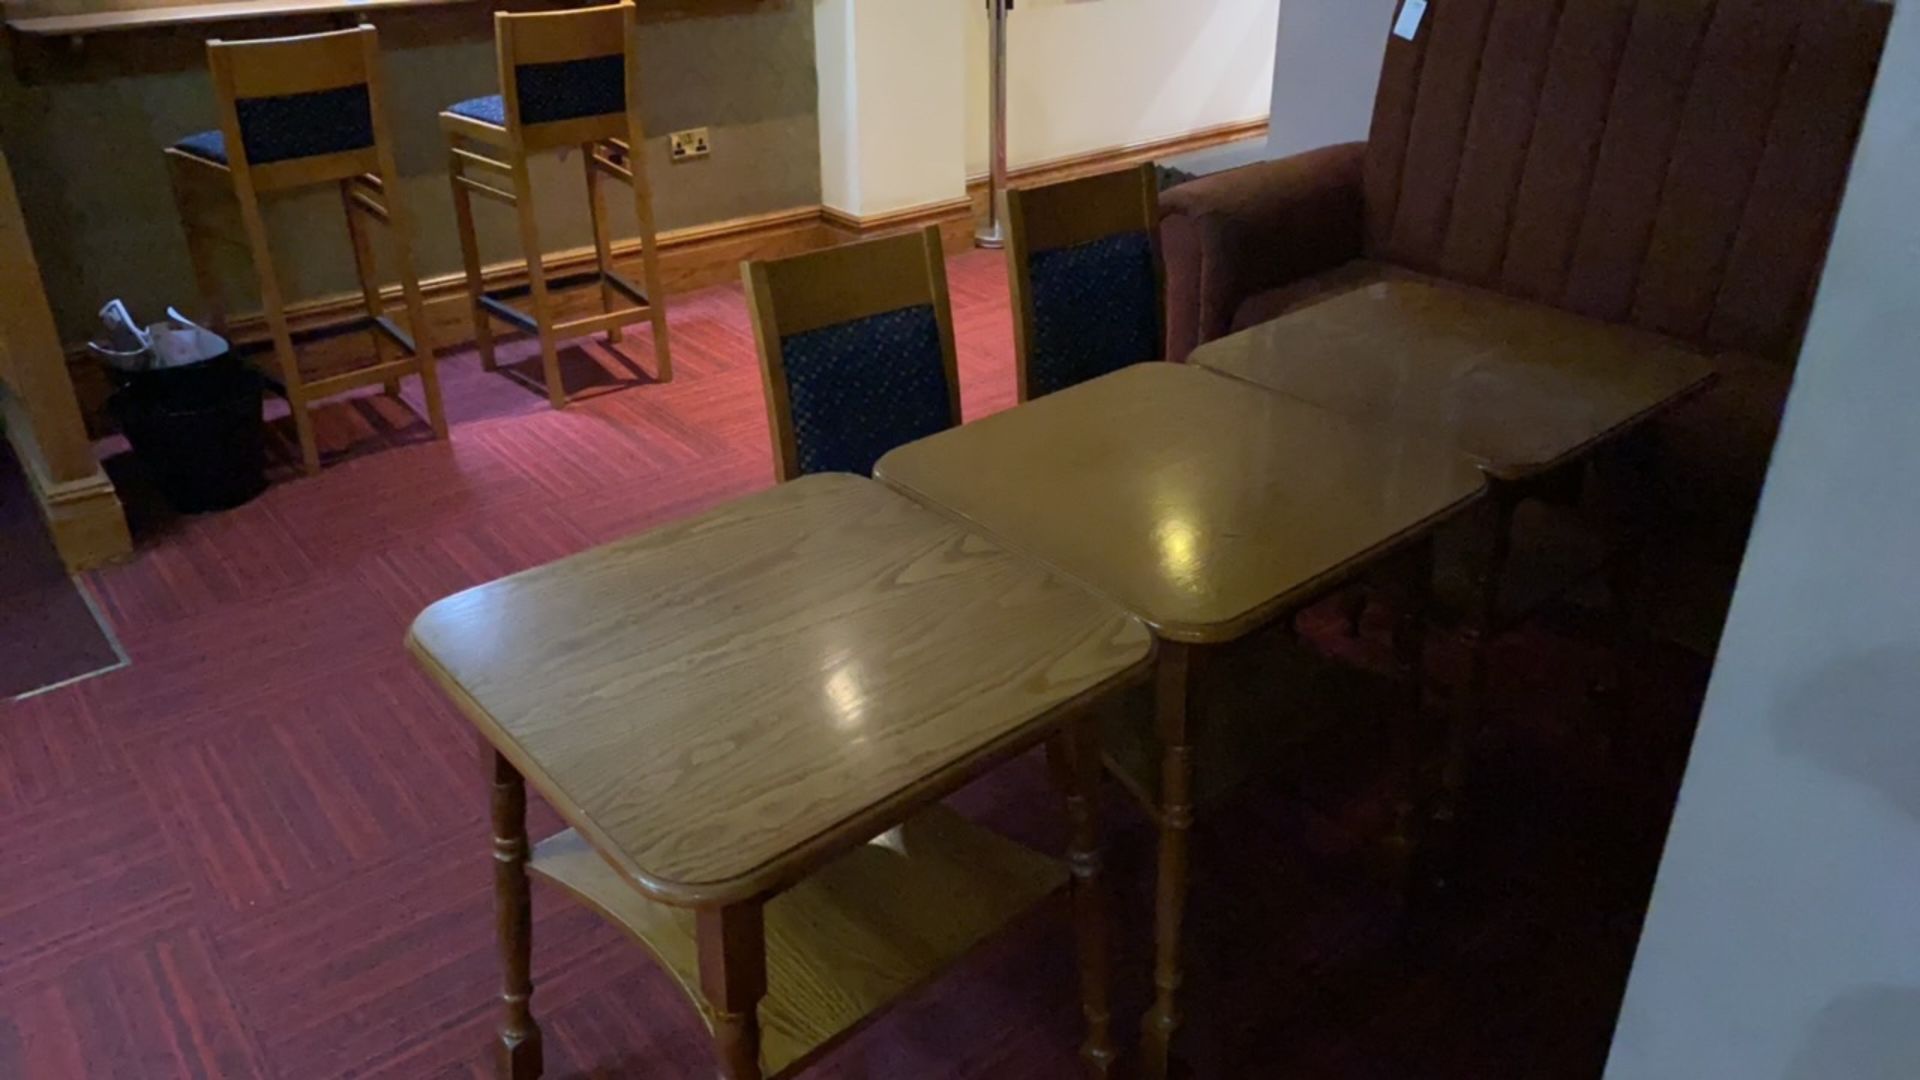 Set Of Three Square Tables With Two Chairs - Image 3 of 4